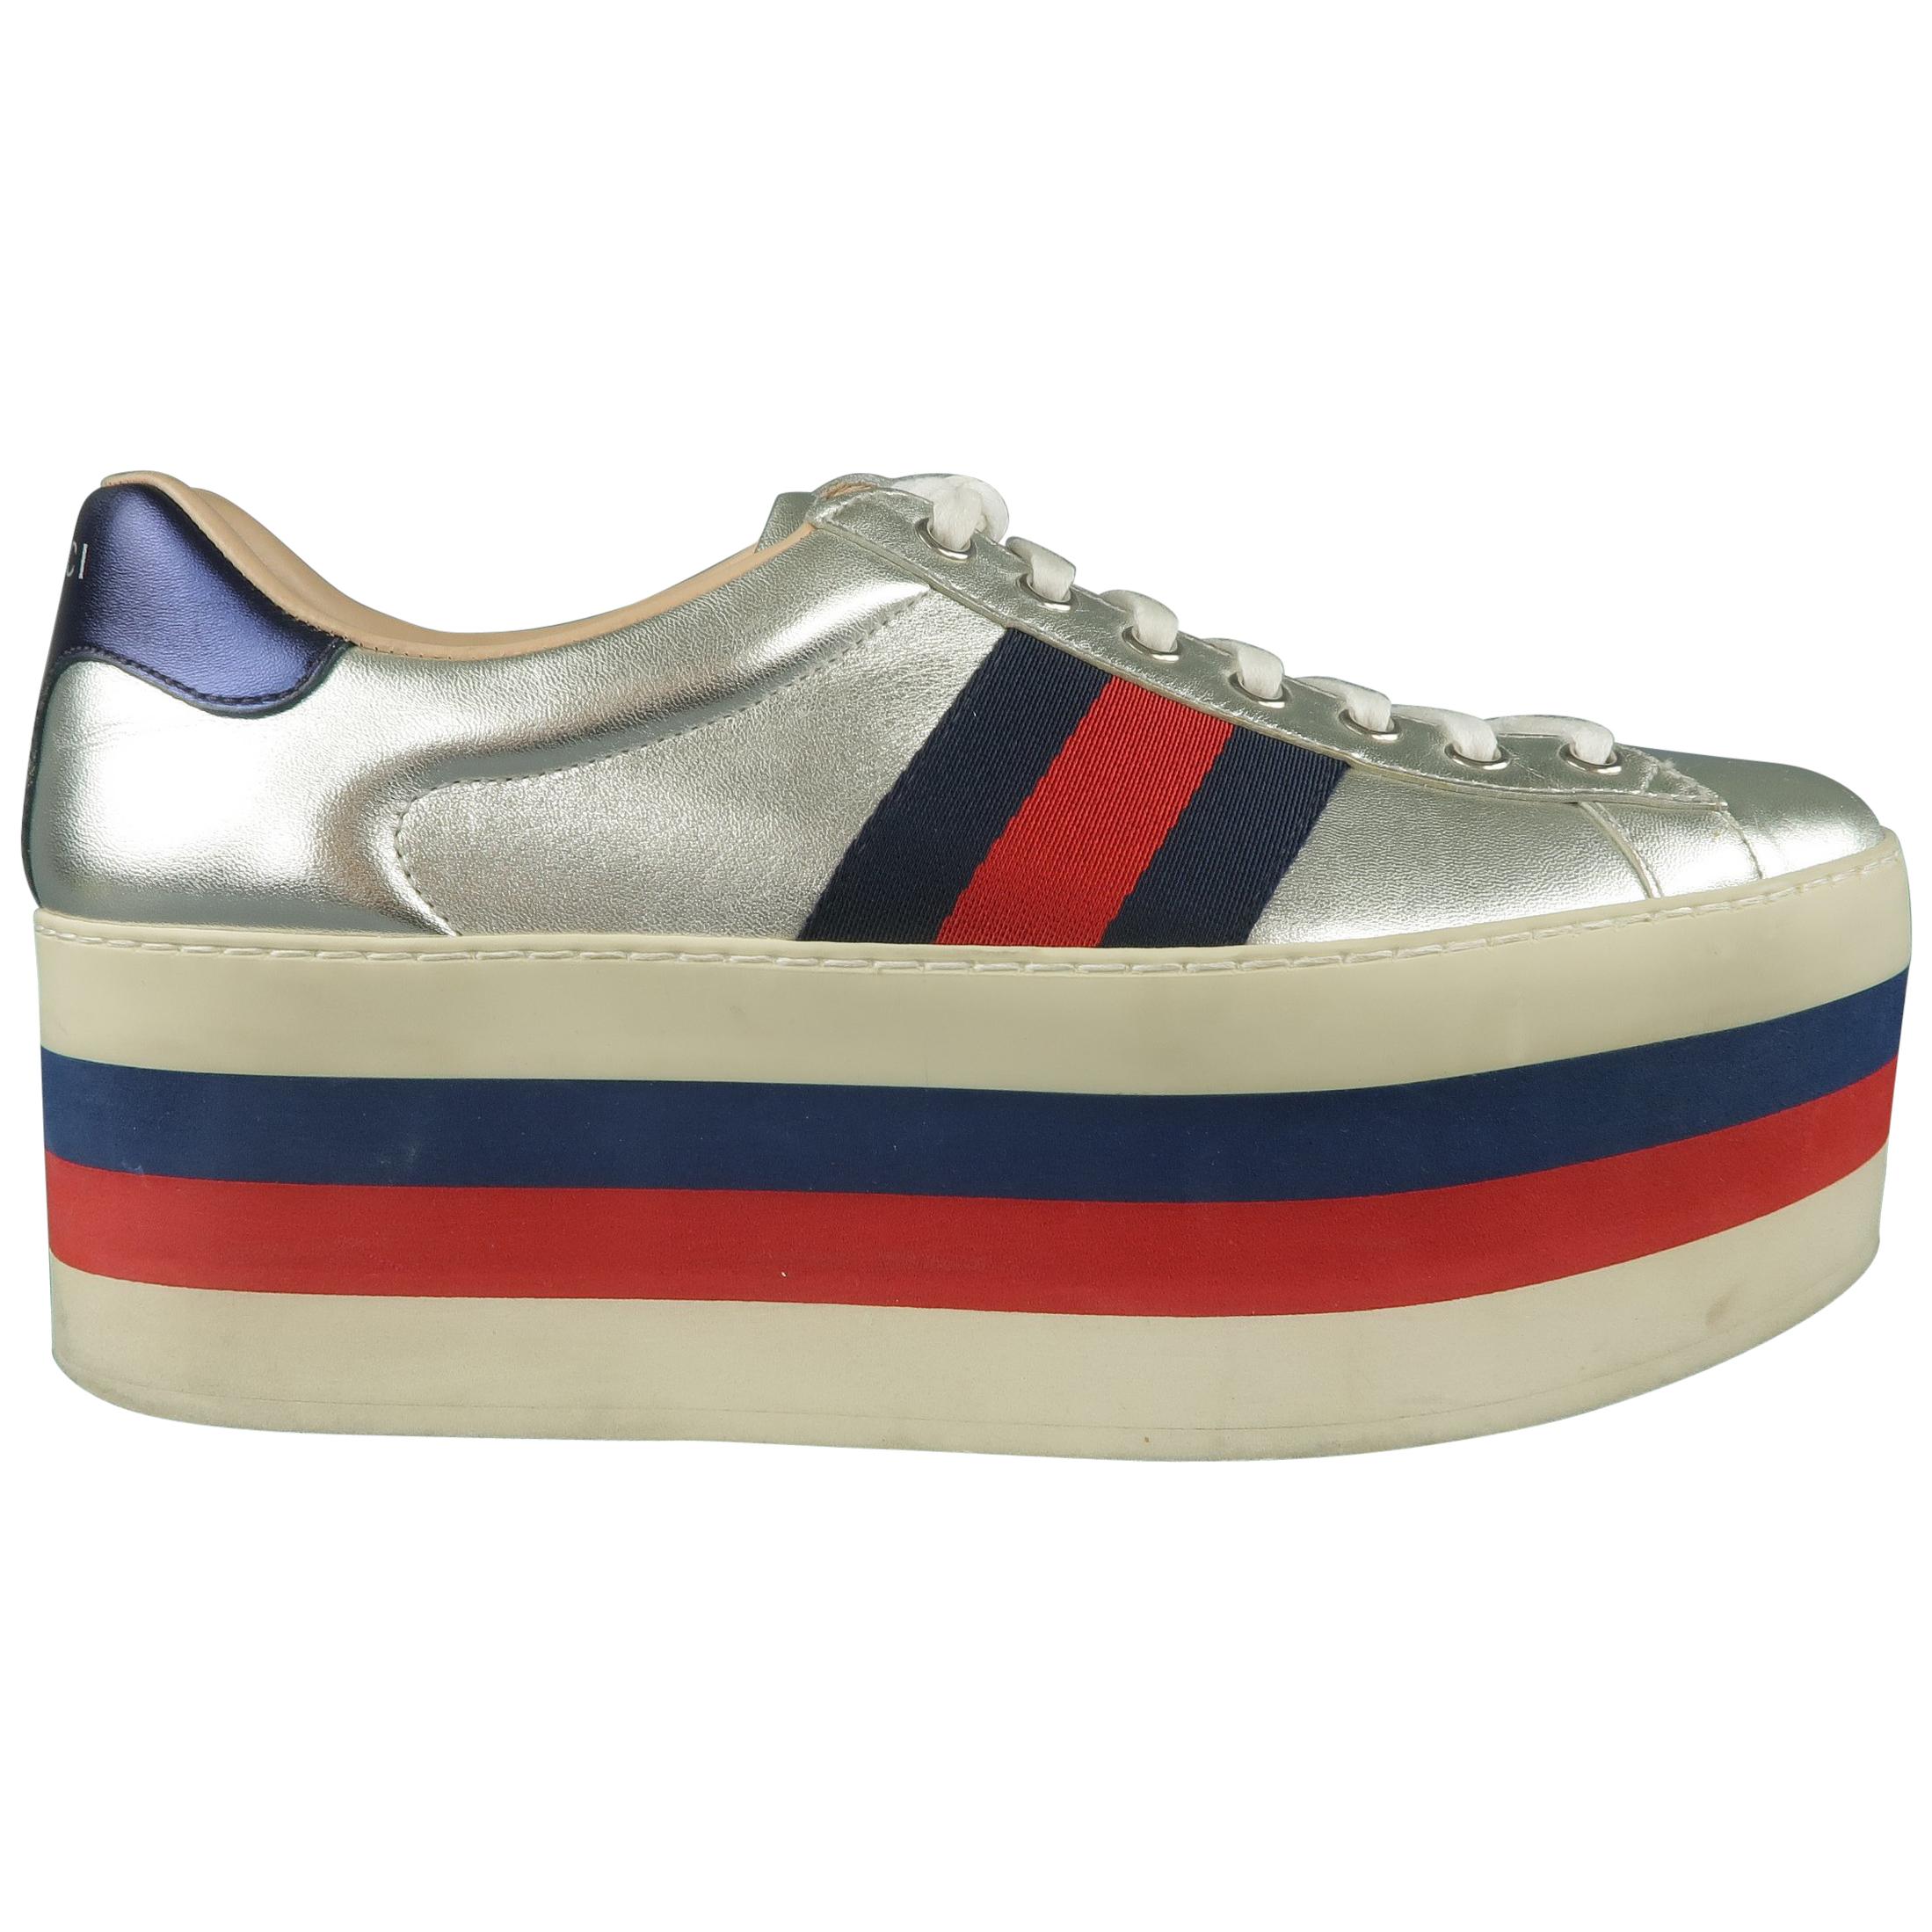 GUCCI Taille 8 Silver Metallic Leather Striped Platform Sneakers Shoes